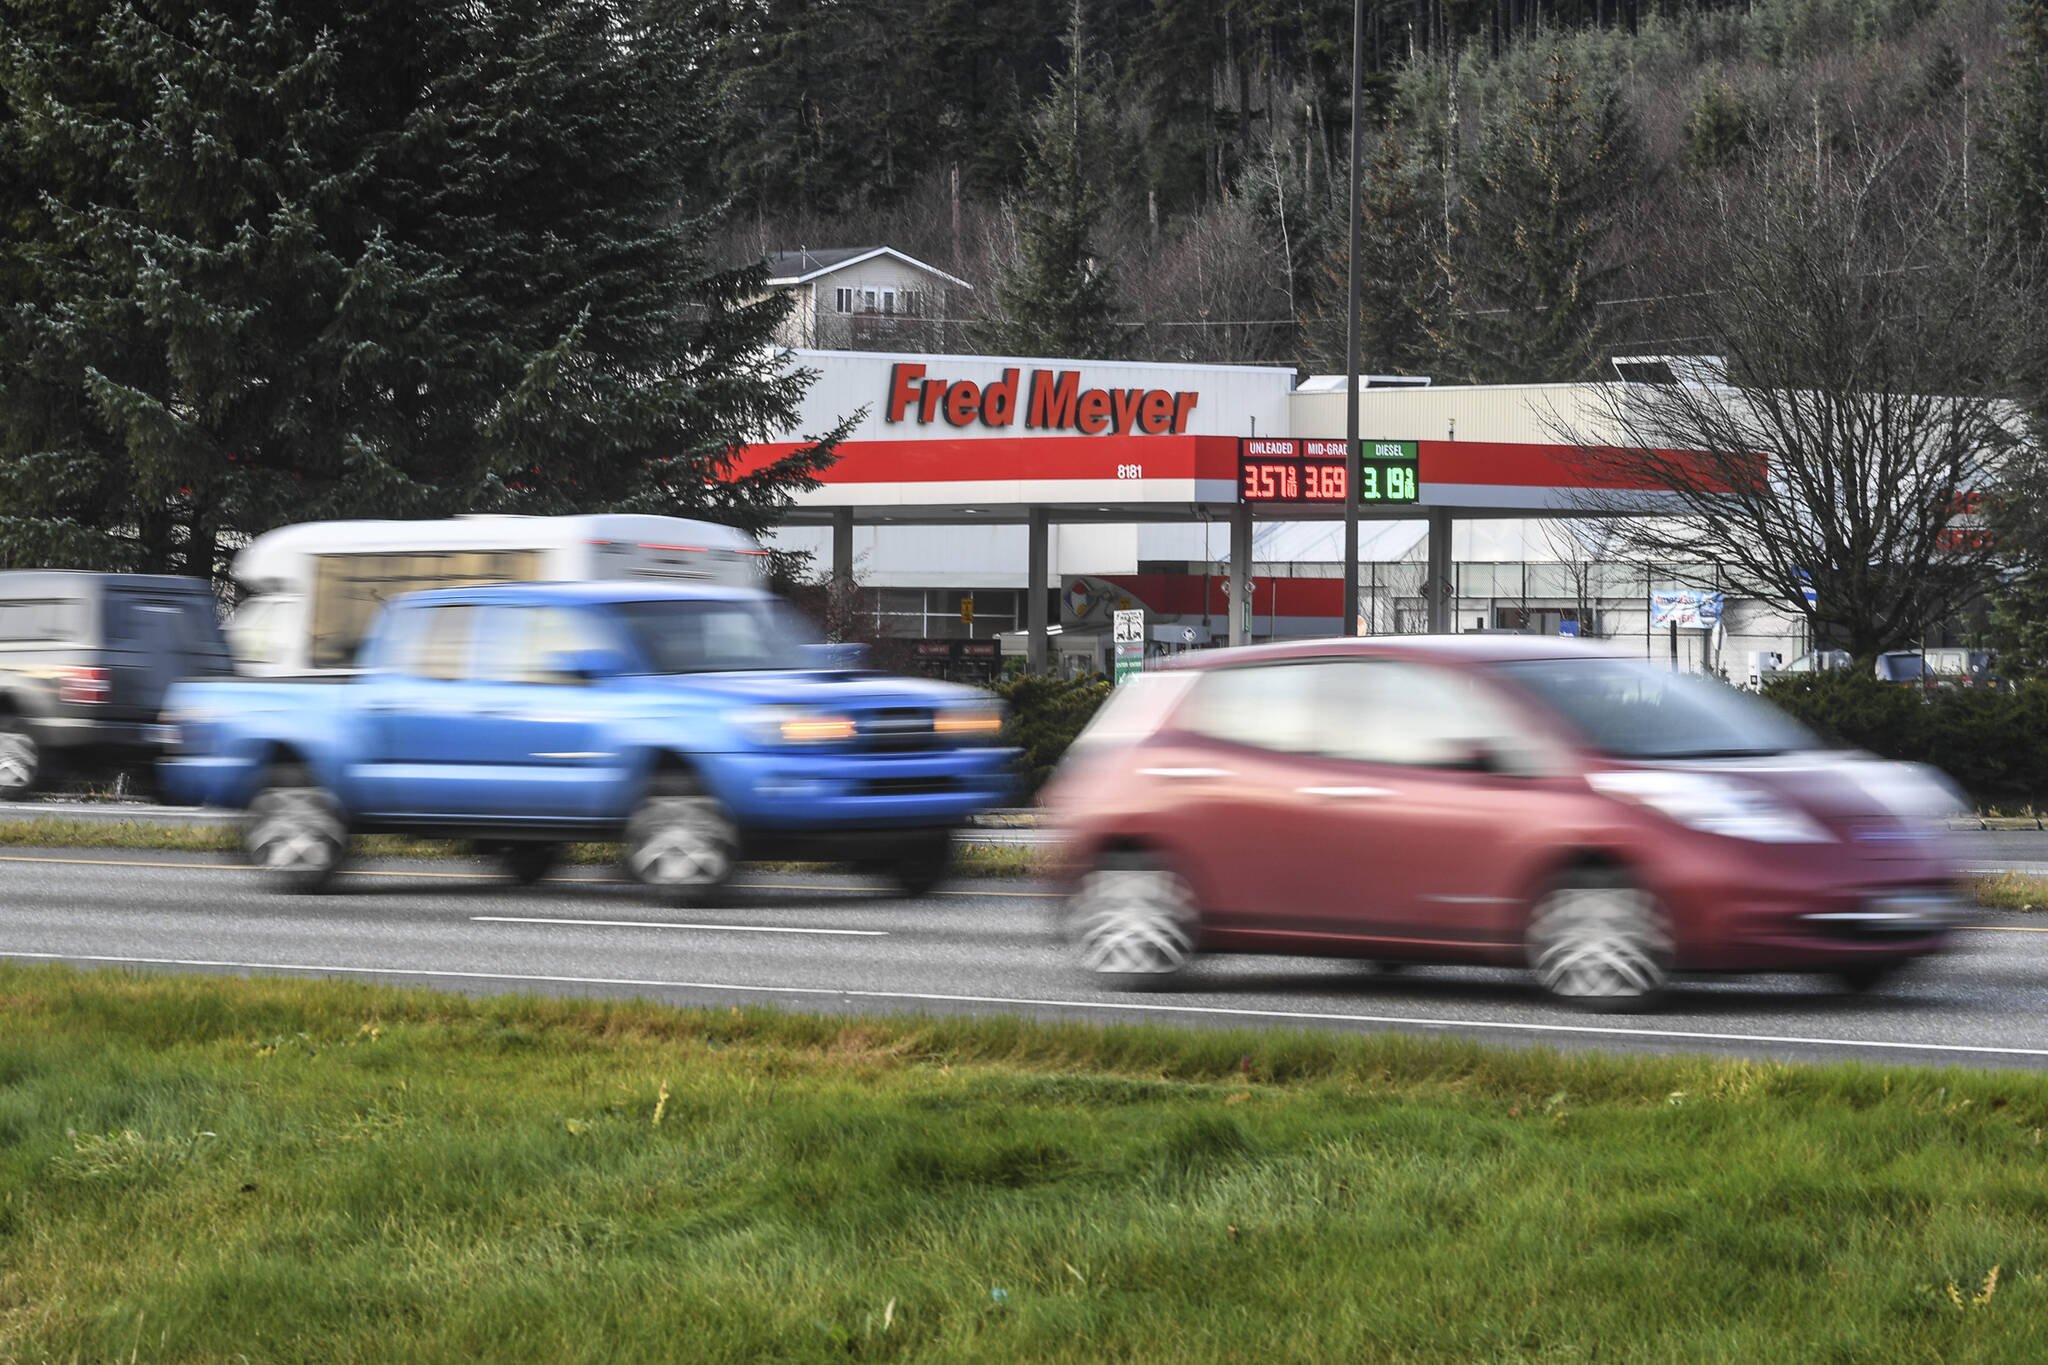 Traffic passes by Fred Meyer in Juneau in November 2019. Many Juneau residents may need — or at least want — to get their prescriptions somewhere other than Fred Meyer as of Jan. 1, since its parent company Kroger has announced the termination of an agreement with a pharmacy benefit manager that works with insurers such as Cigna and Premera Blue Cross Blue Shield of Alaska. (Michael Penn / Juneau Empire File)